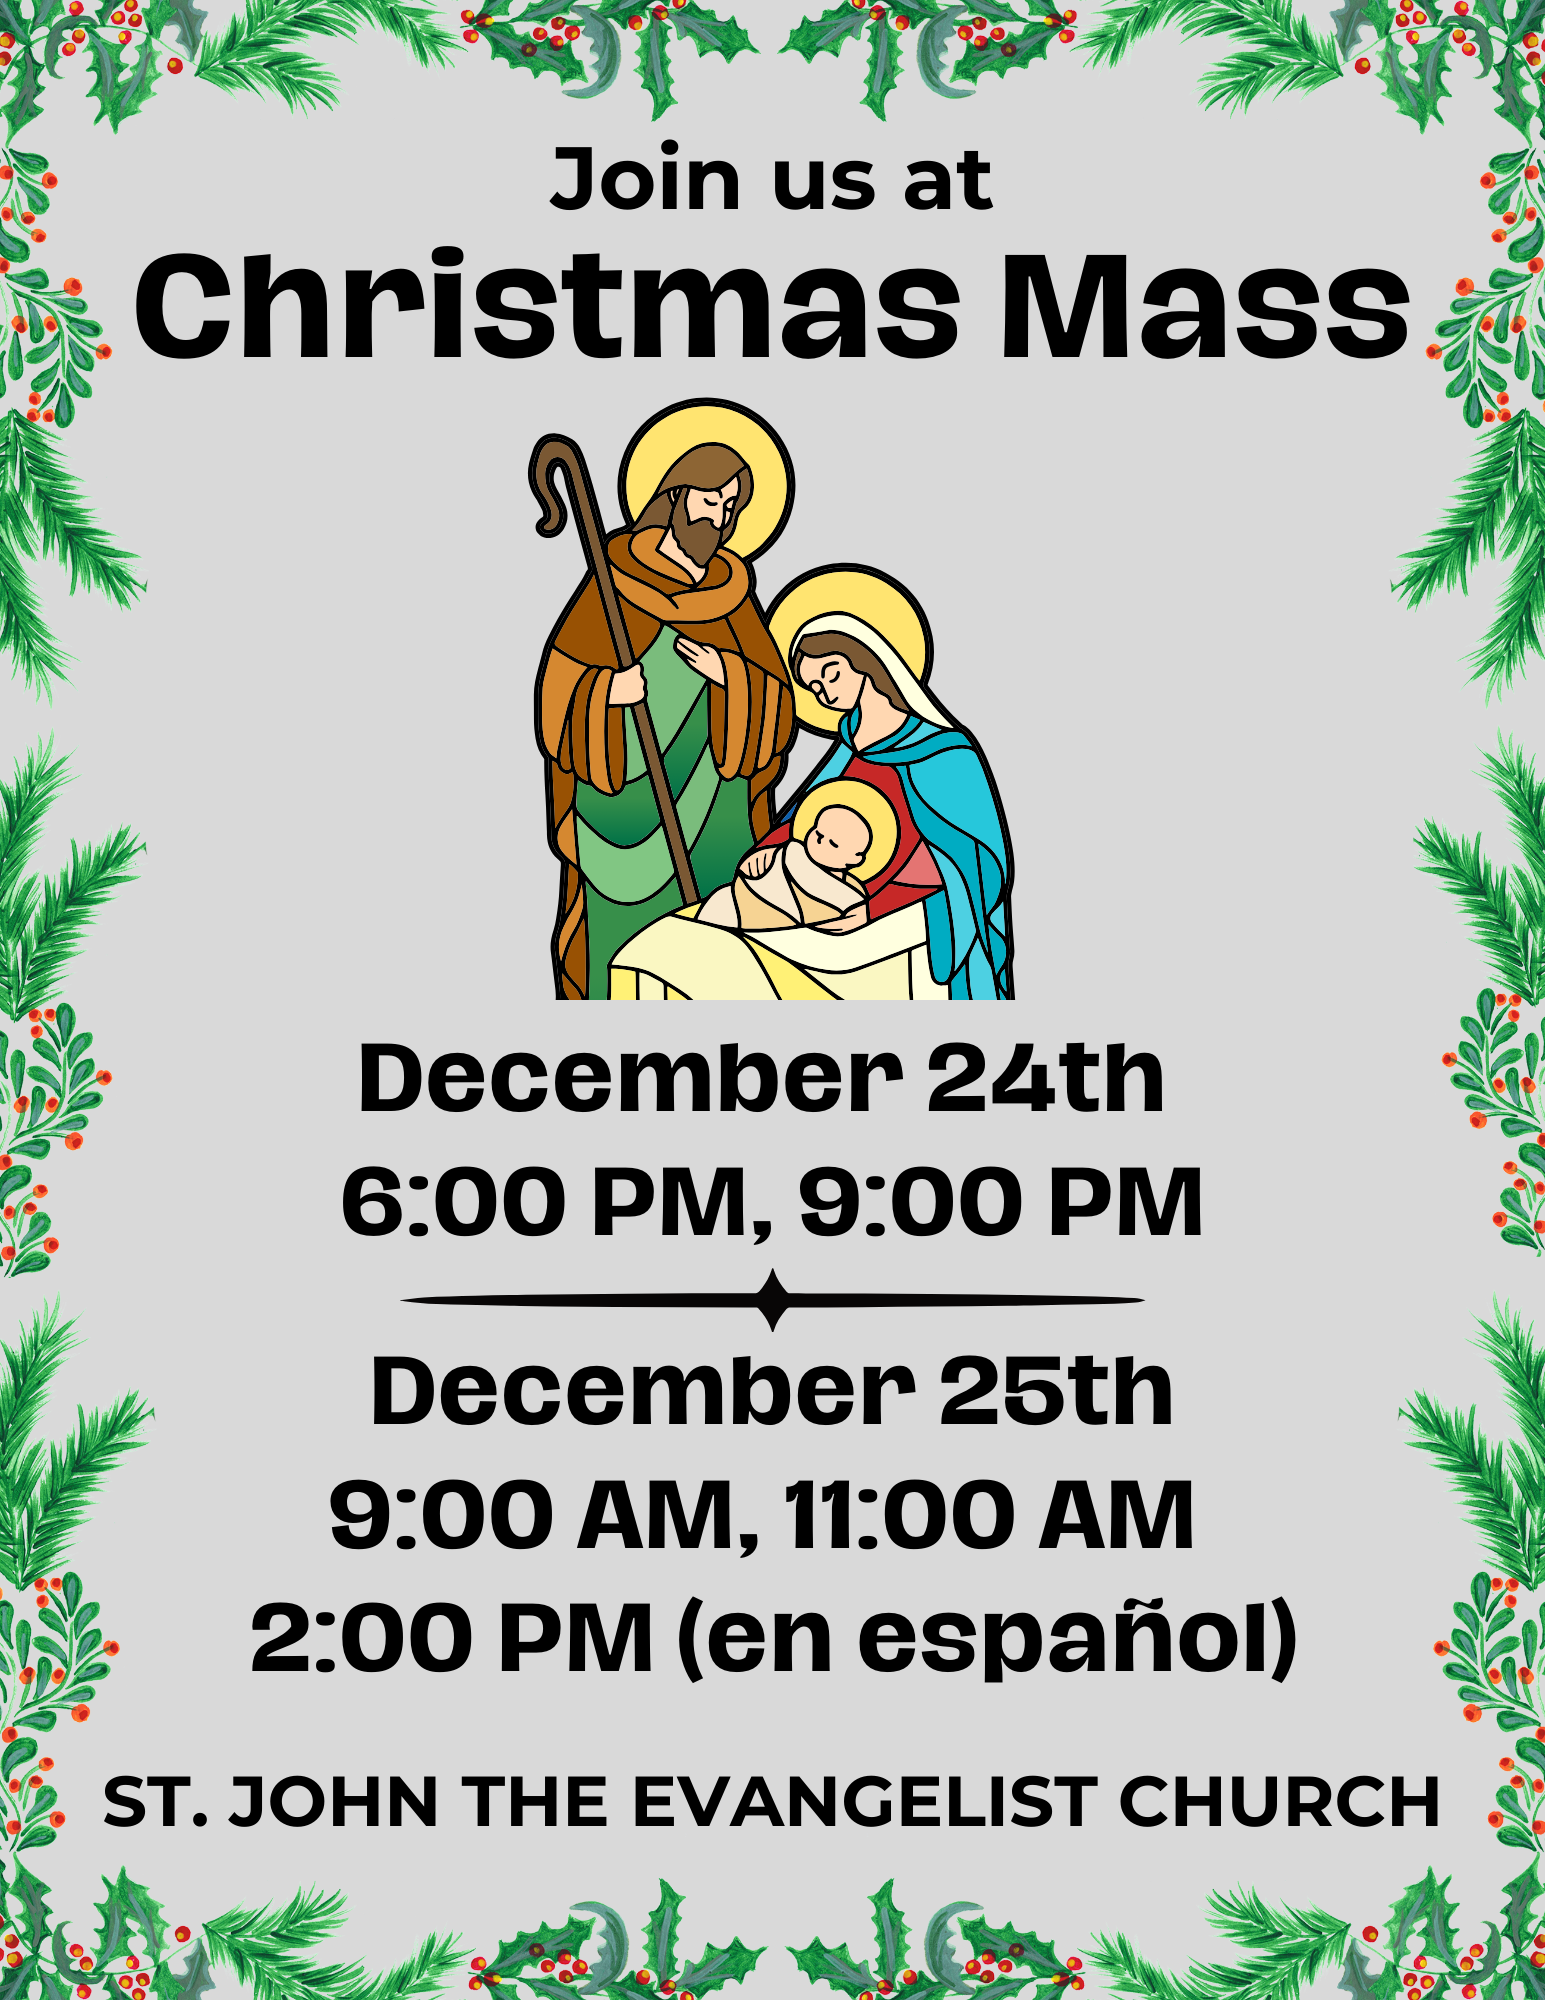 An image of the nativity and the Christmas Mass times for the Parish